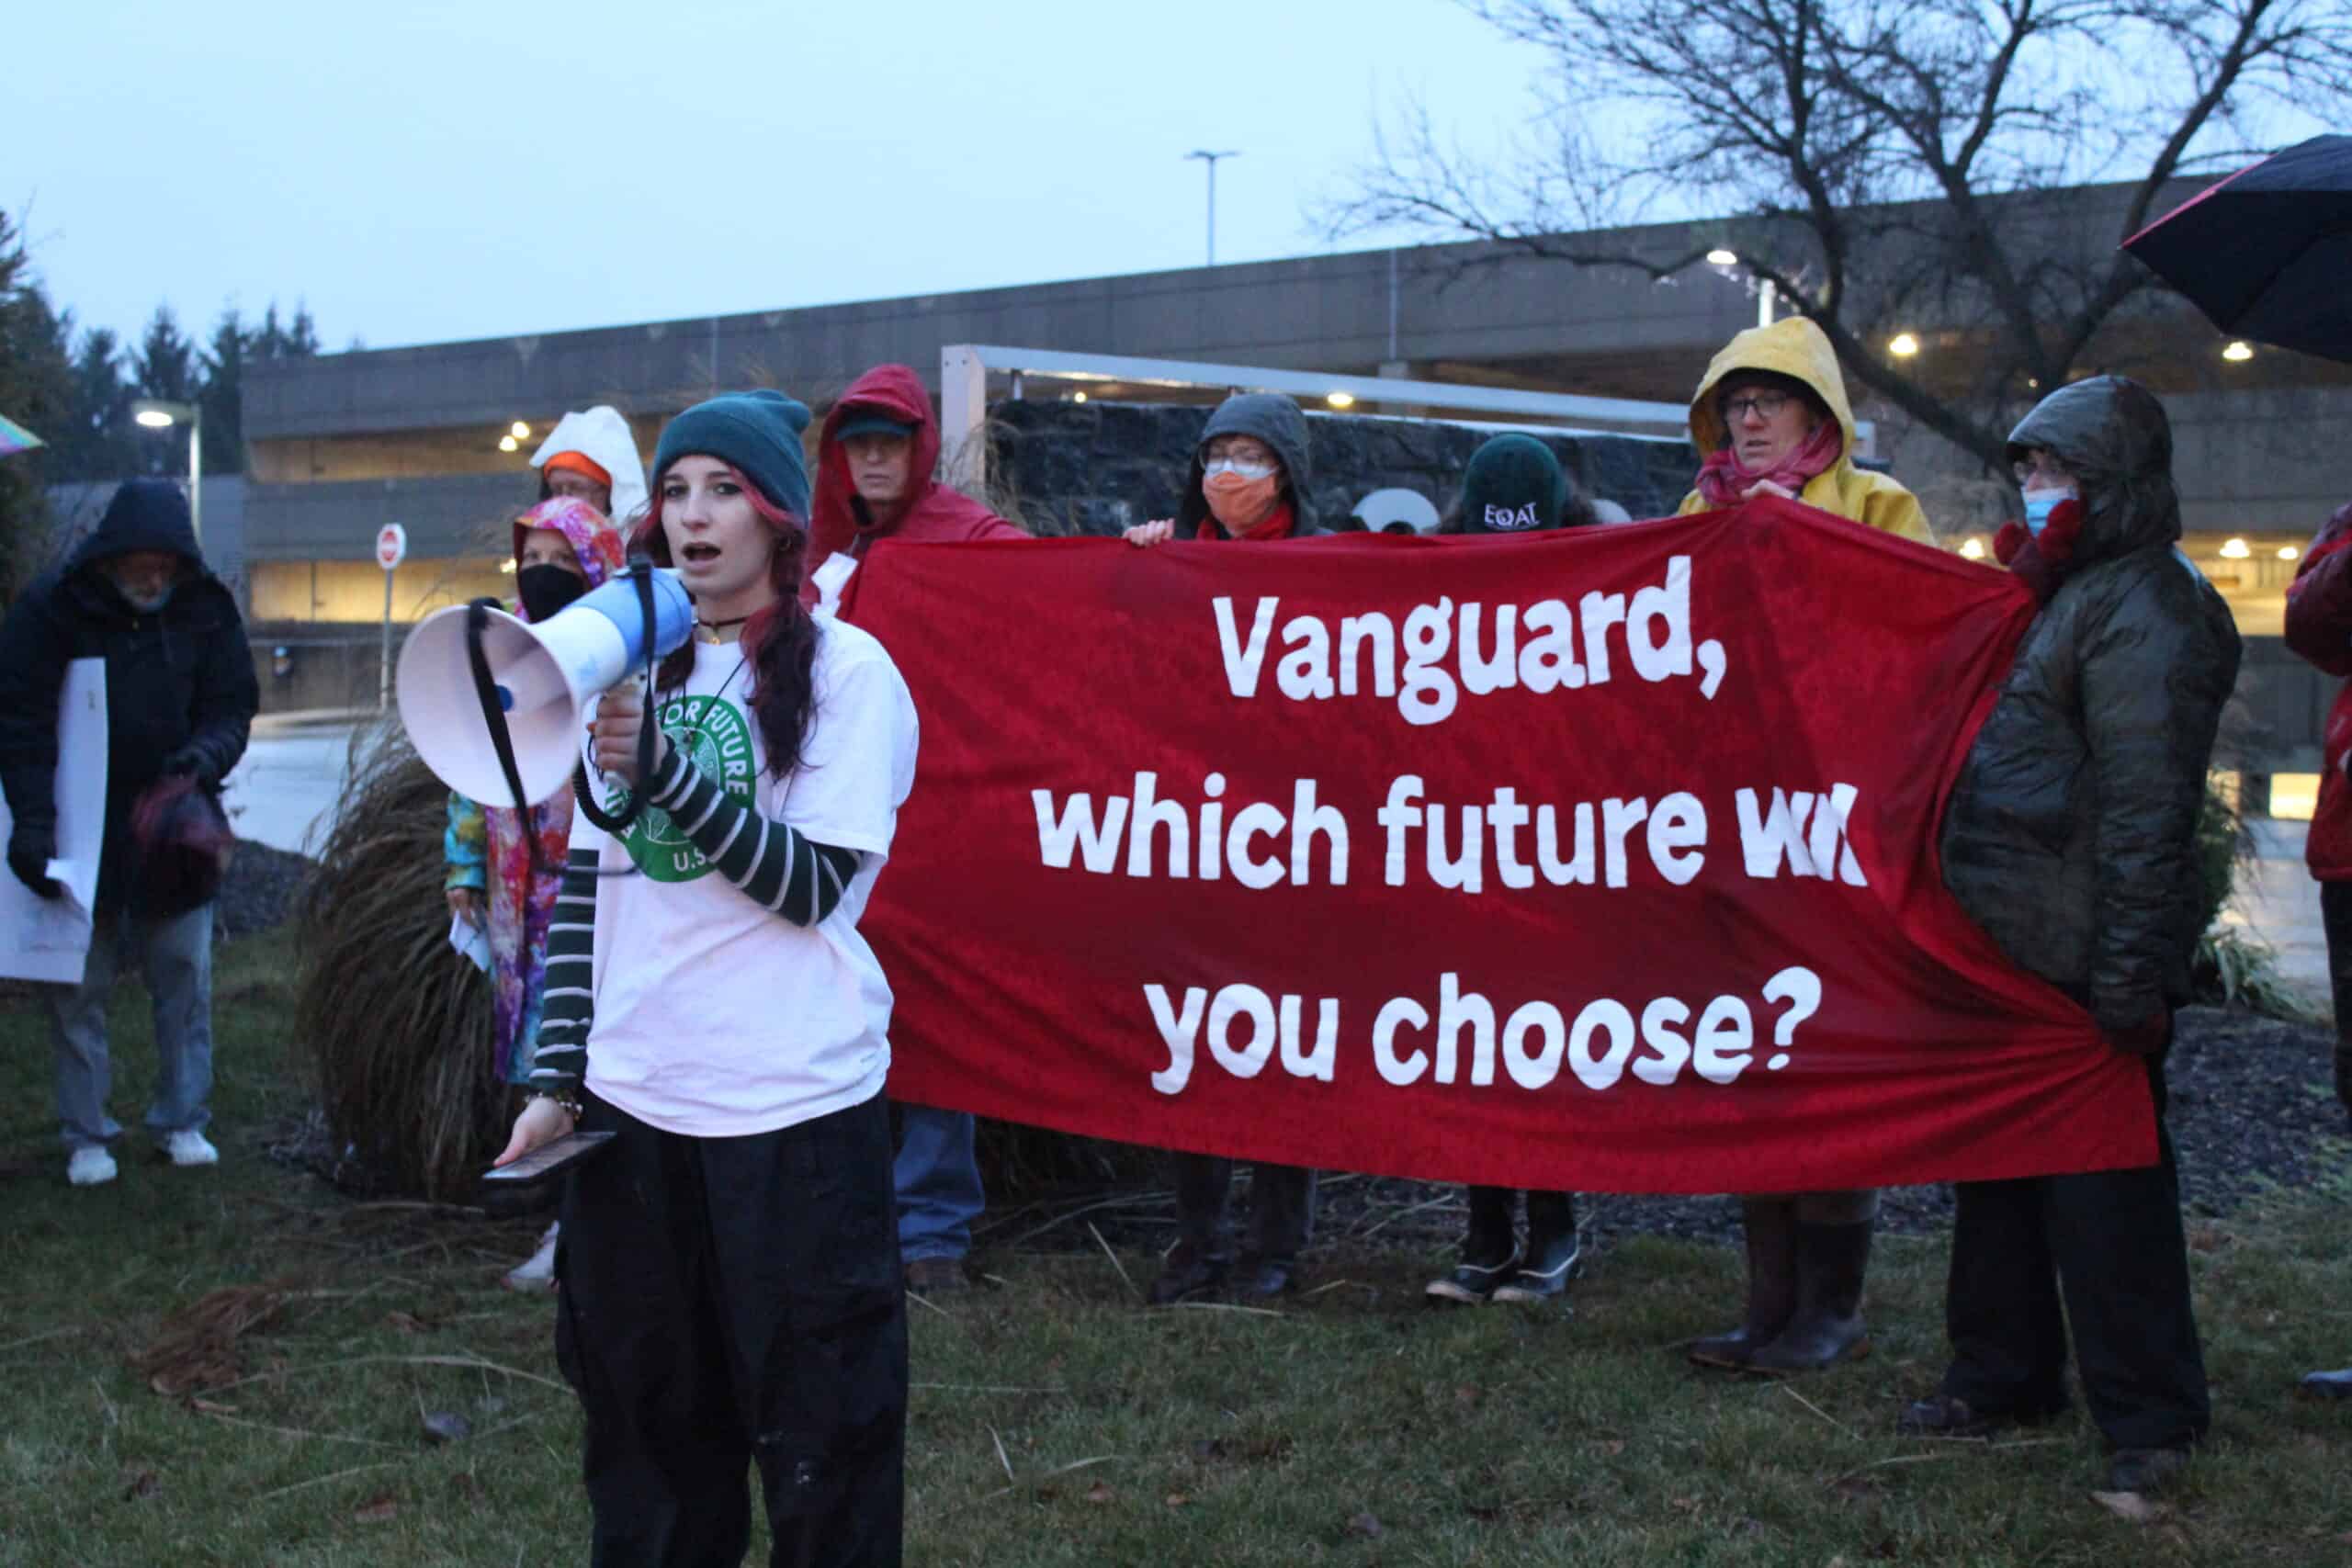 Vanguard, Which Future Will You Choose?